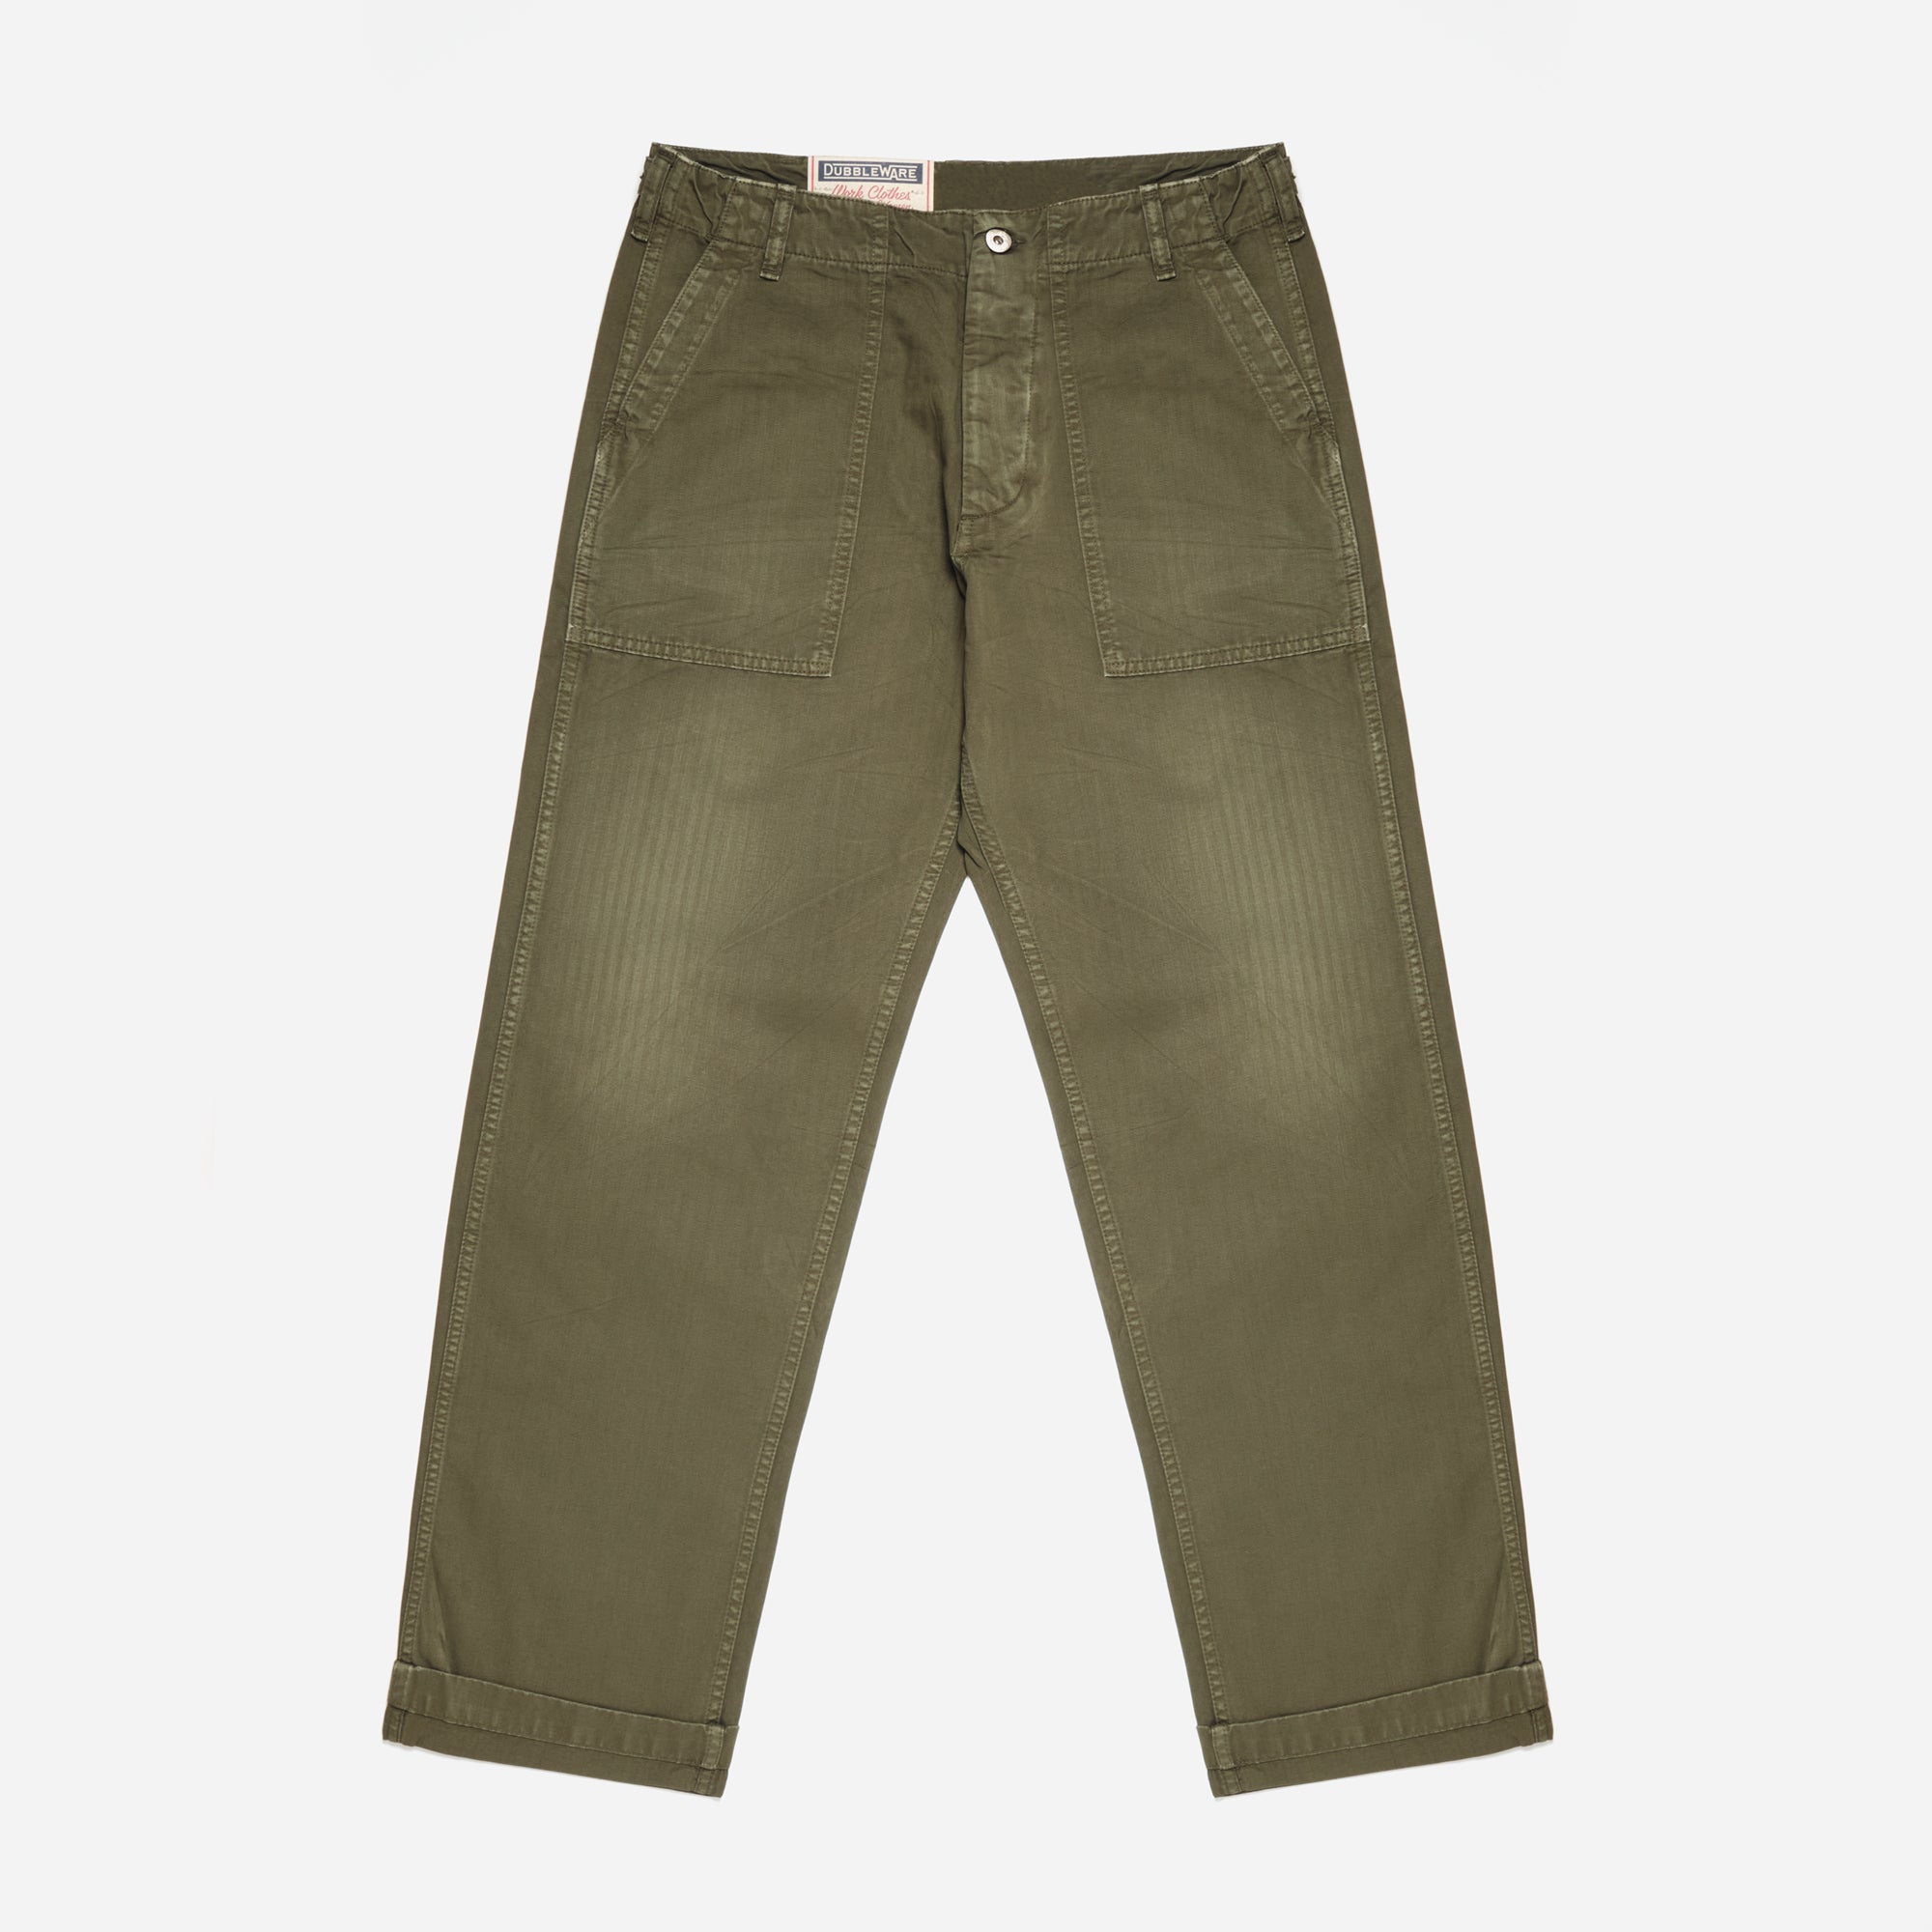 RELAXED FATIGUE PANT MADE IN ITALY - WASHED OLIVE